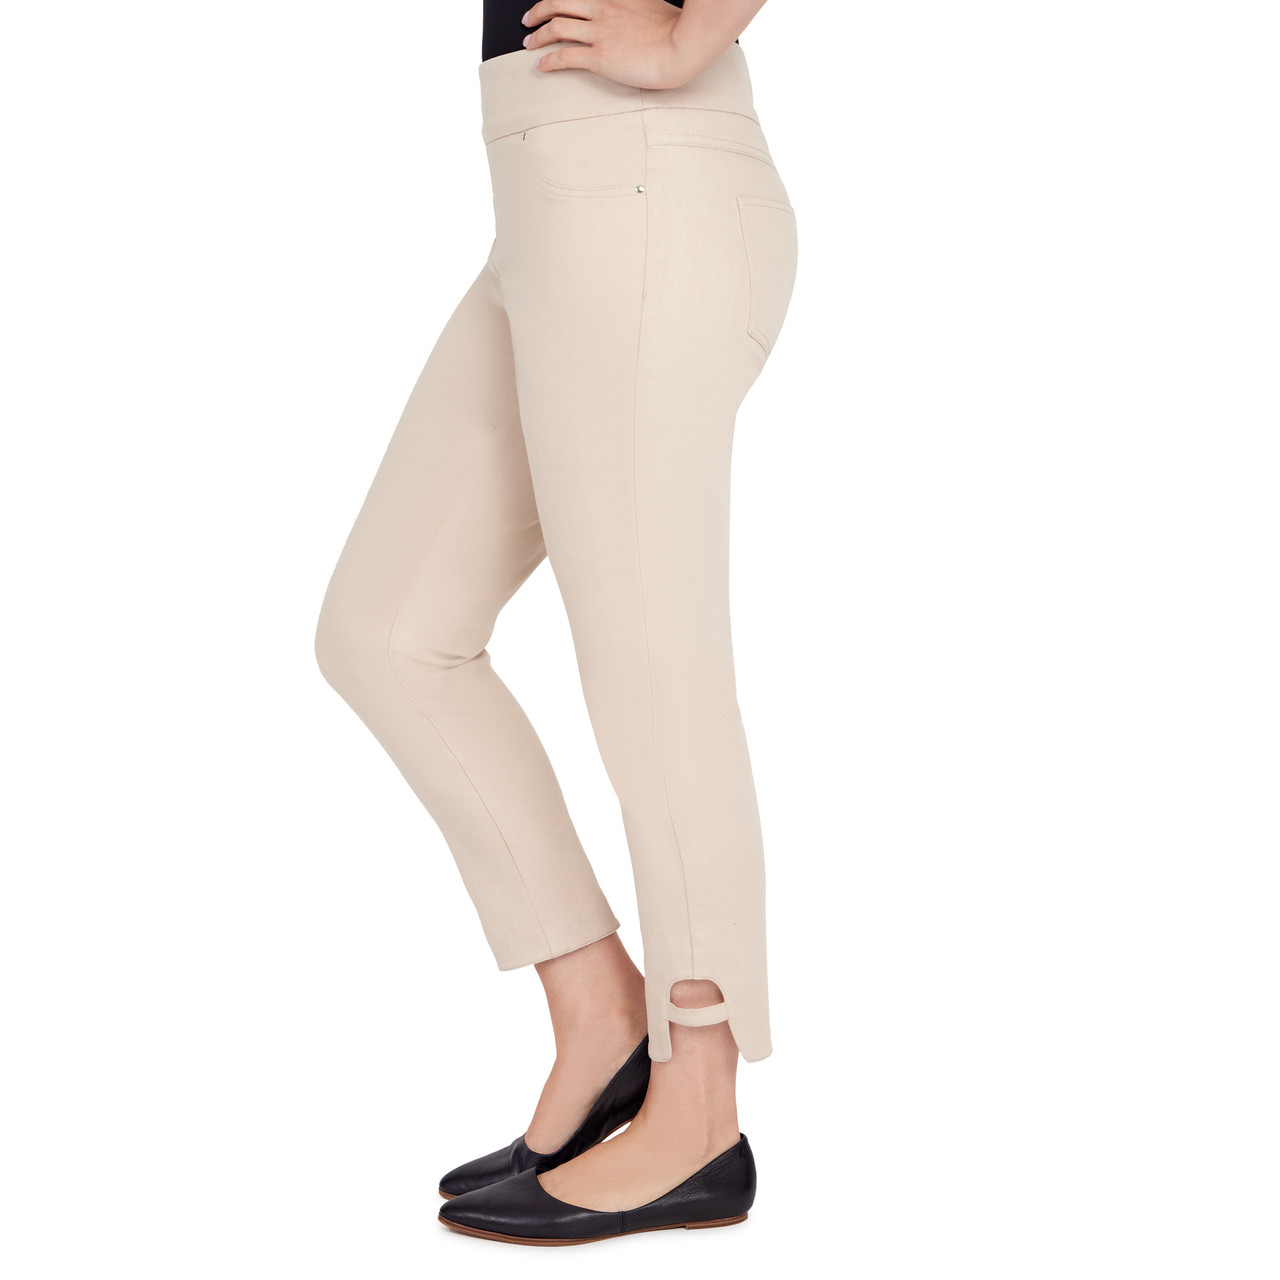 Petite Ankle Pants for Women